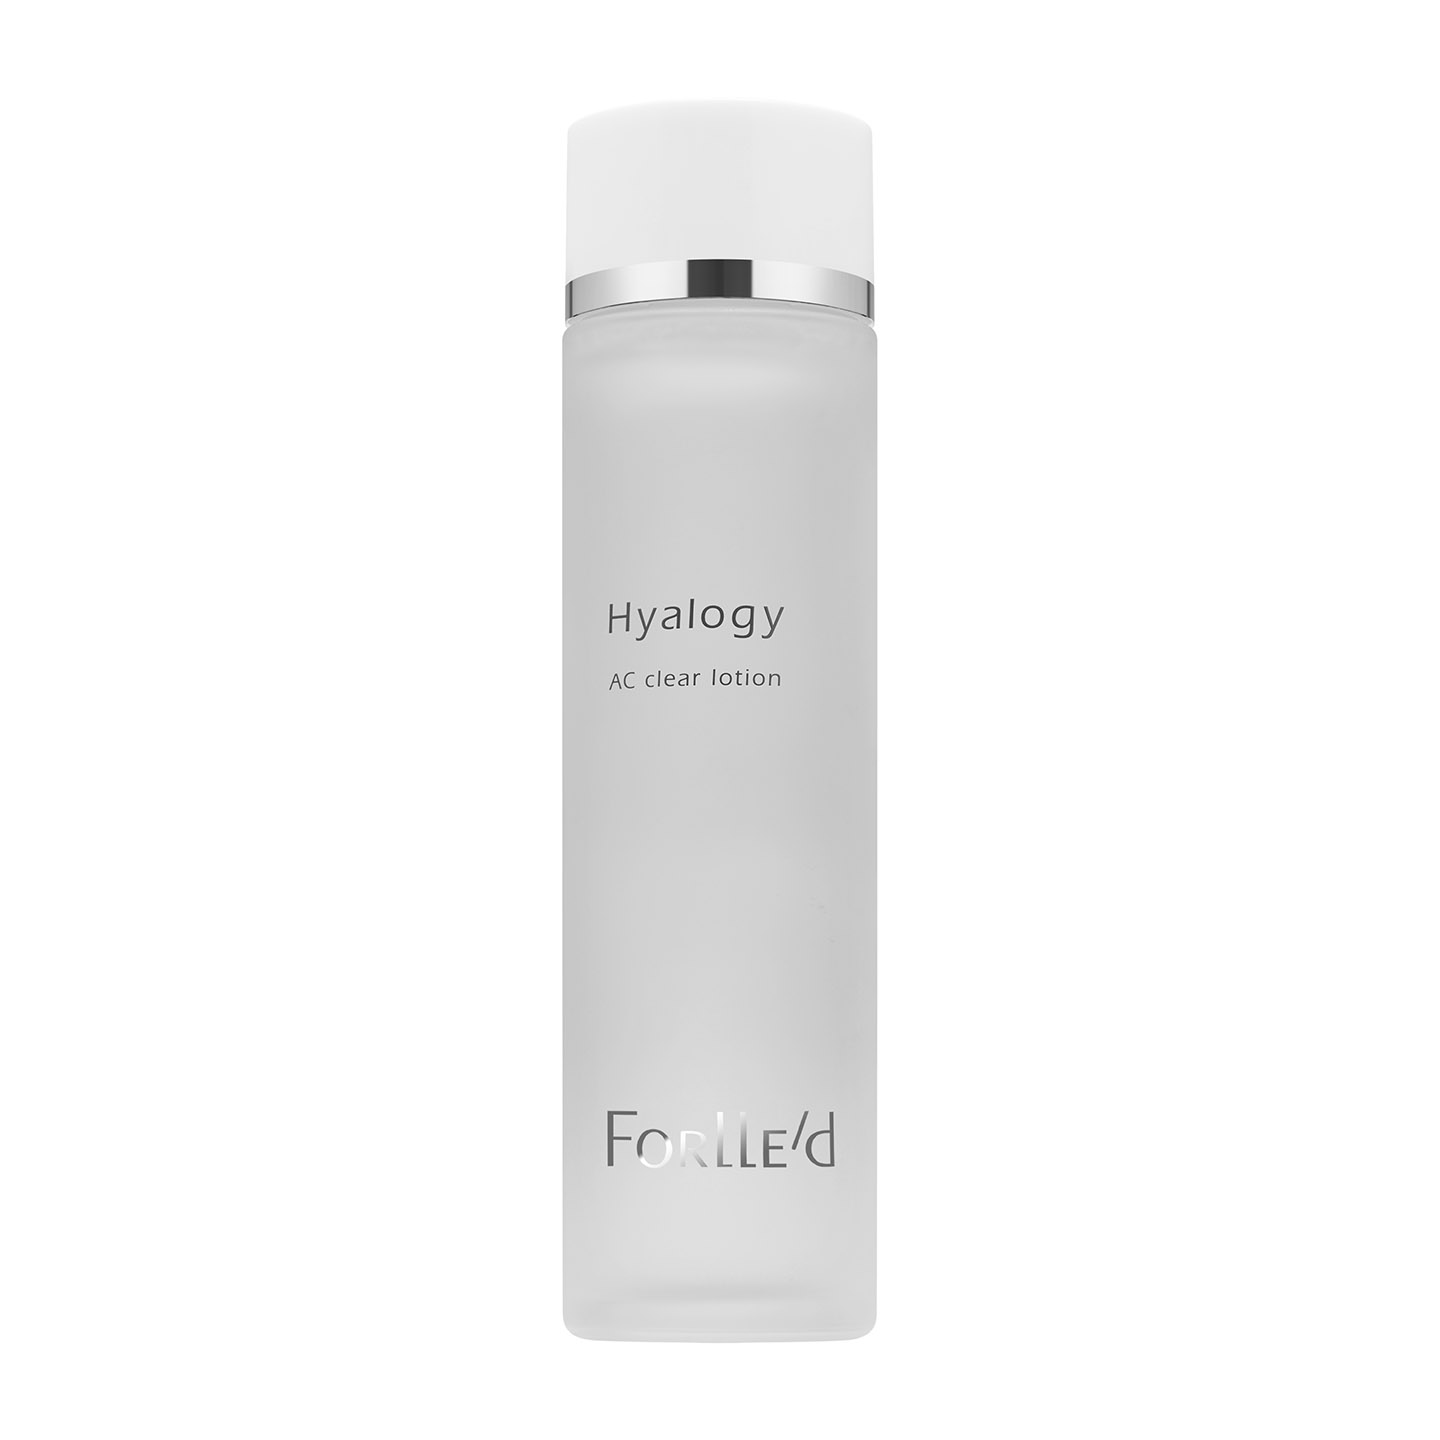 Hyalogy AC clear lotion 